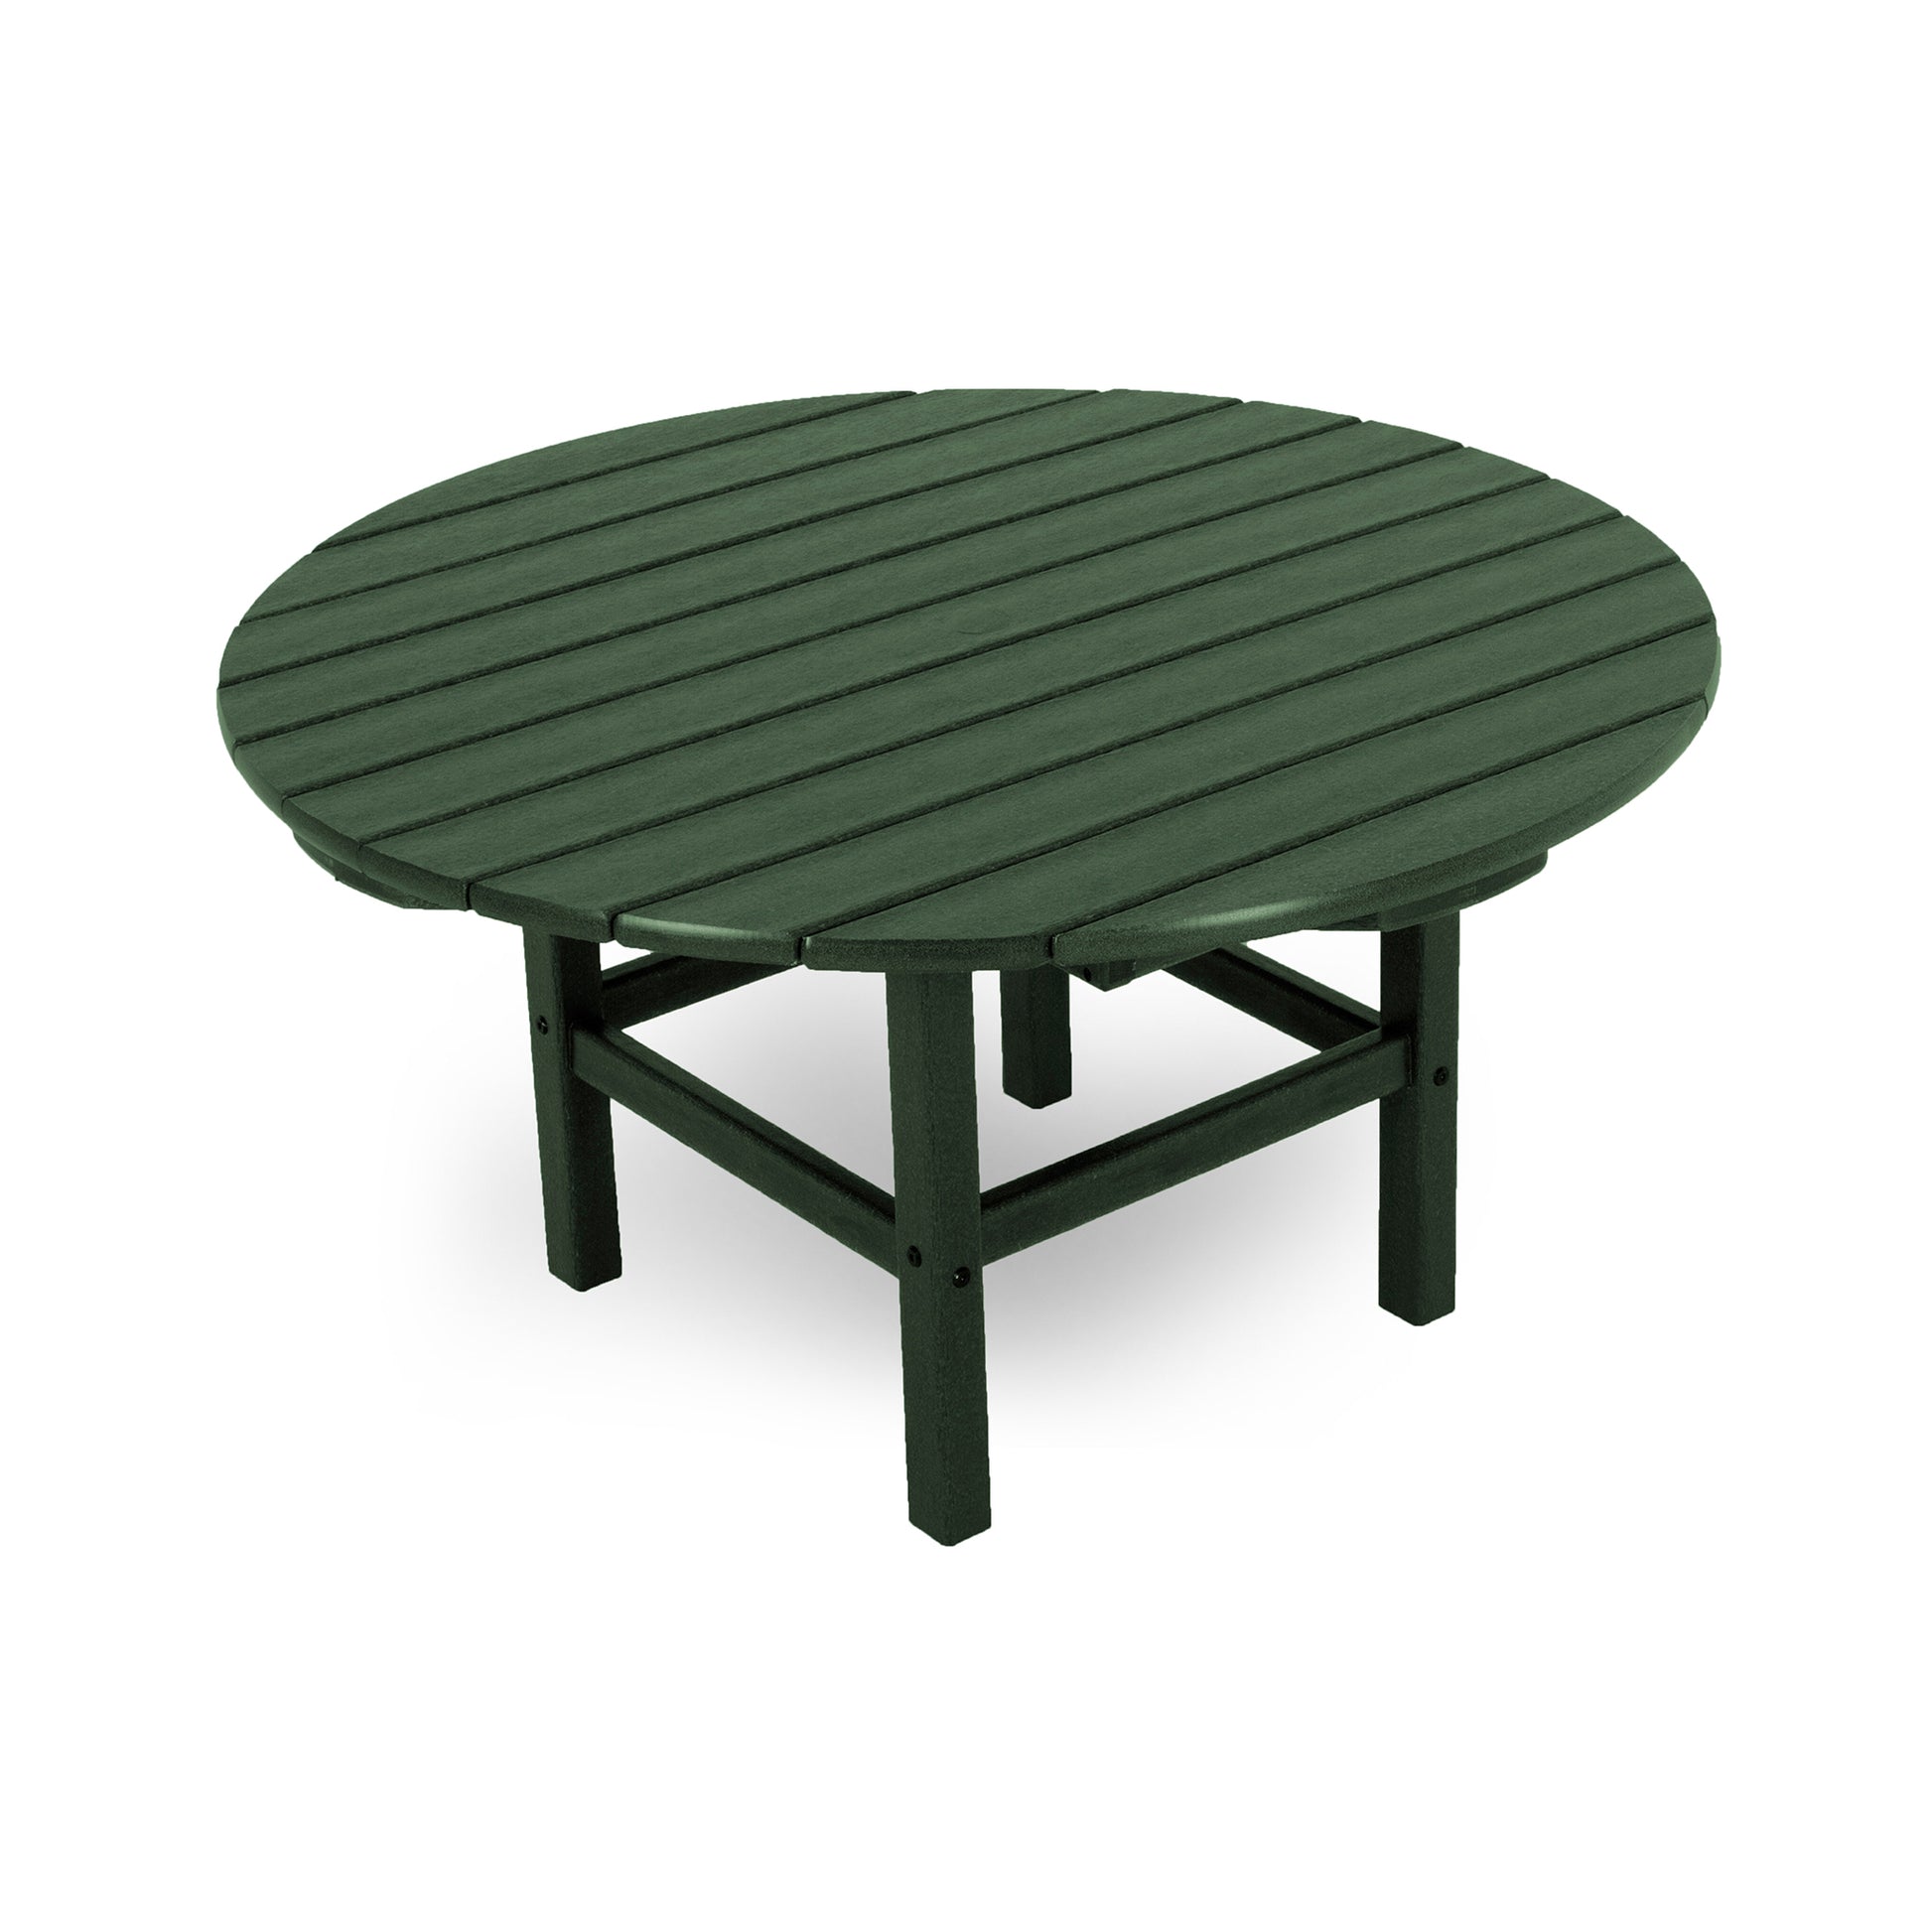 A round, green POLYWOOD® Outdoor 38" Conversation Table with horizontal slat top design and a sturdy base, isolated on a white background.